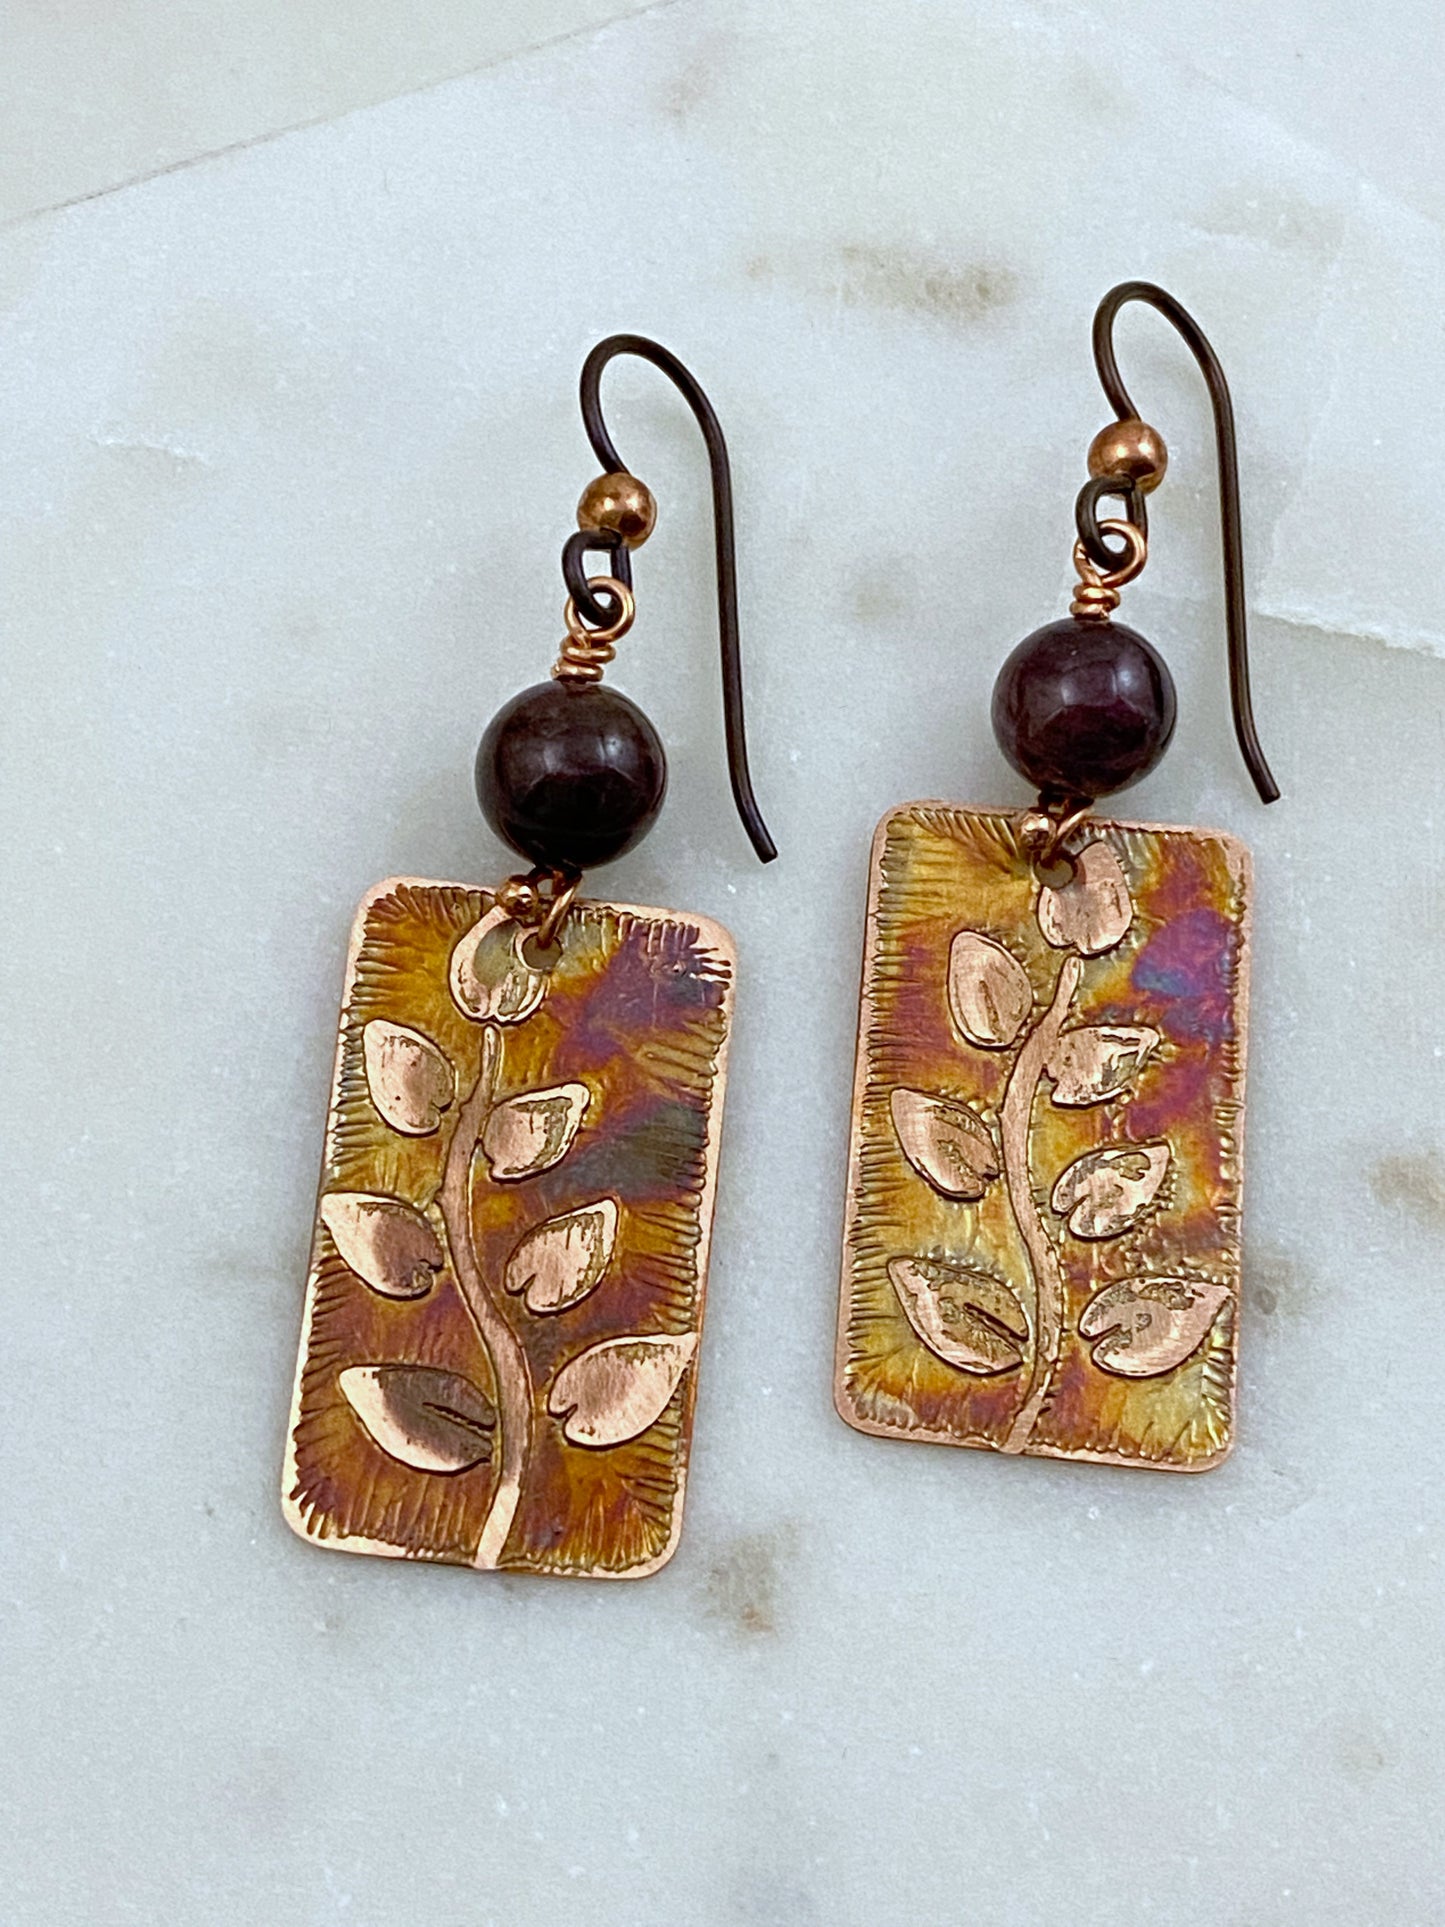 Acid  etched copper earrings with tourmaline gemstones